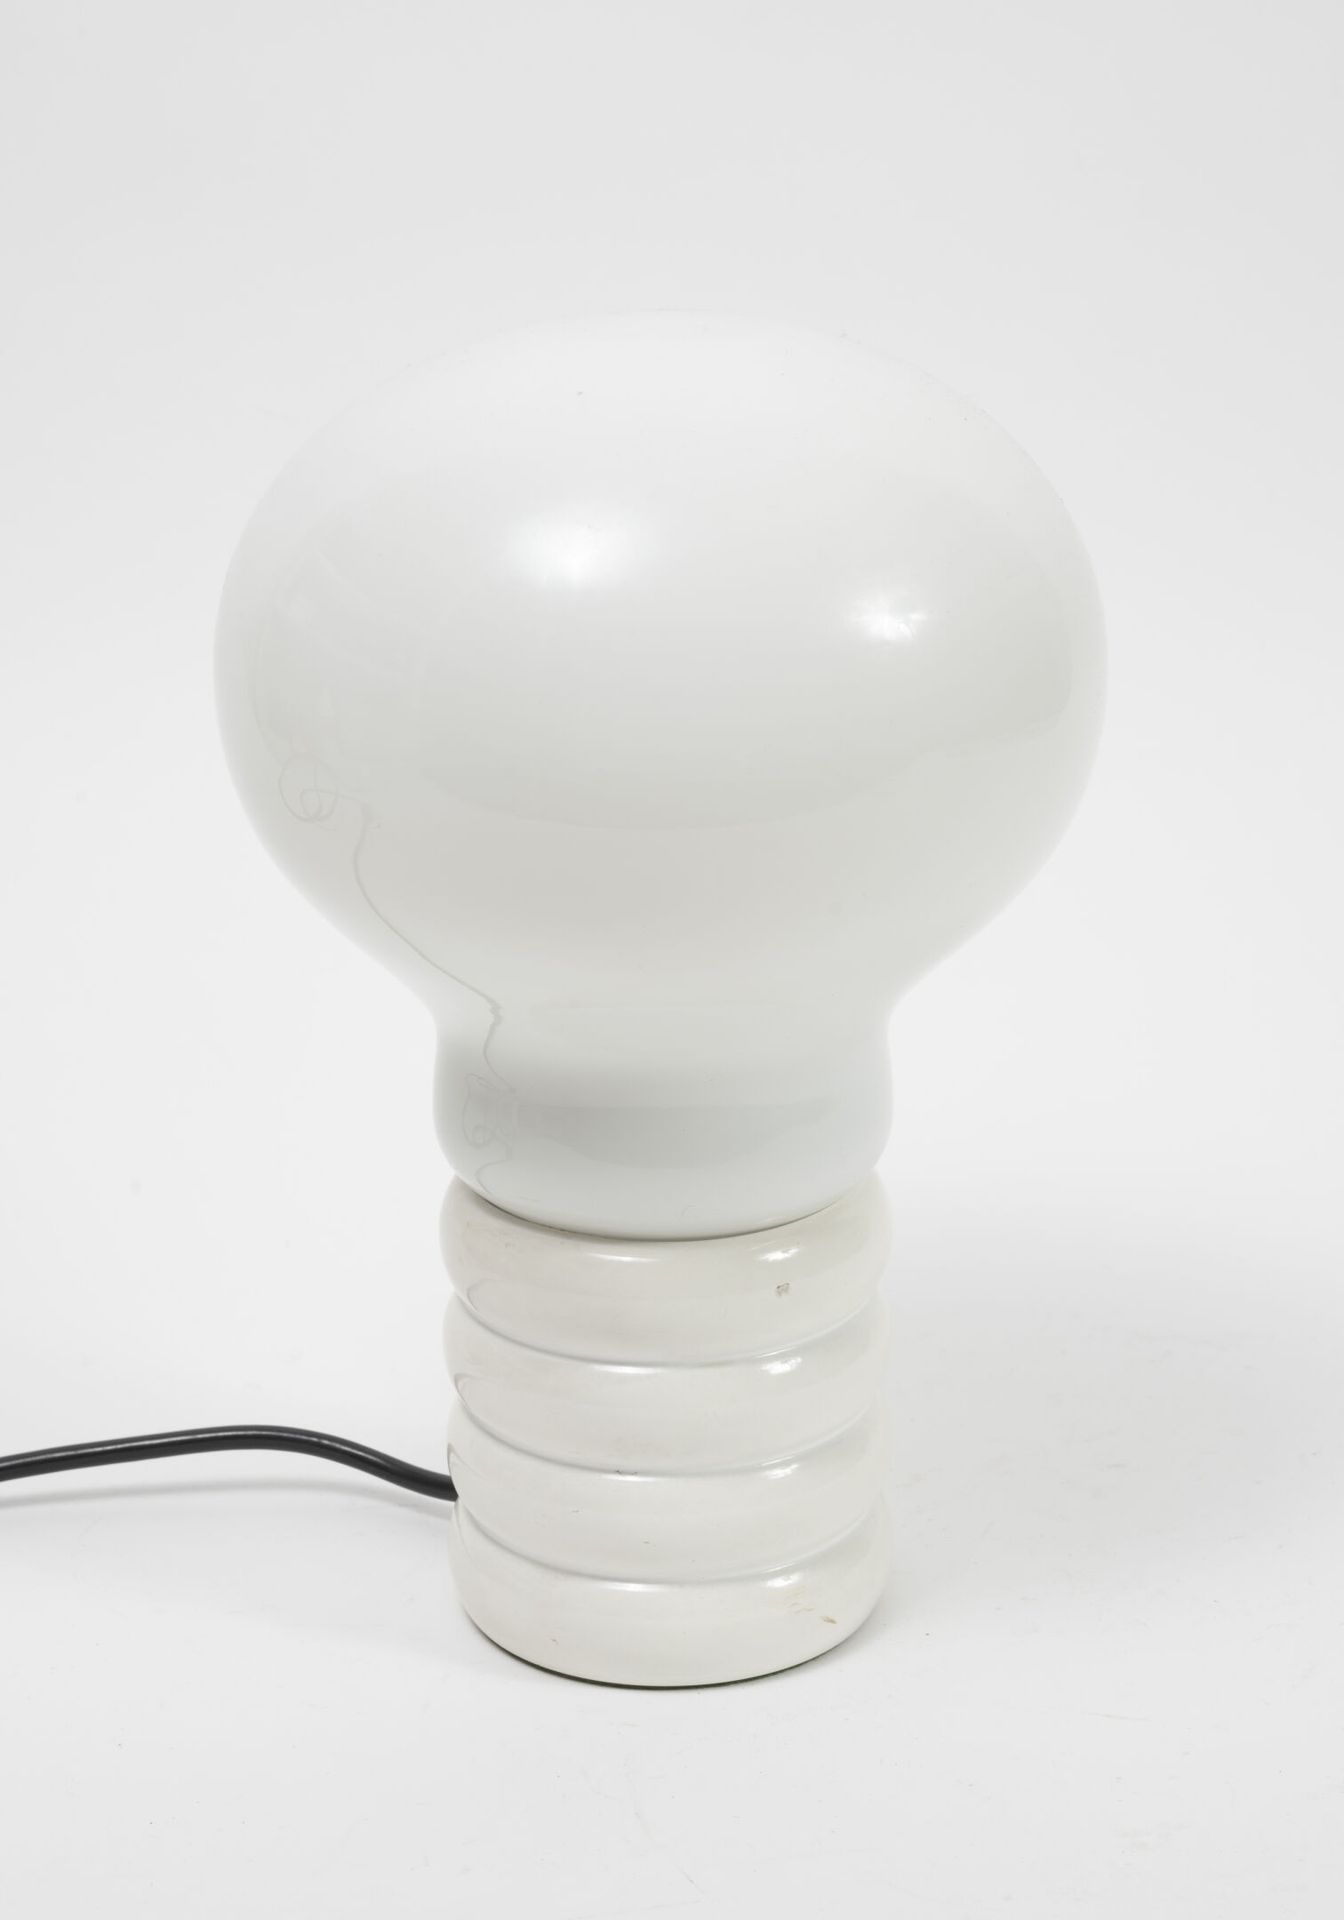 Ingo MAURER (1932-2019) Lamp called Bulb.

In white lacquered metal and opal gla&hellip;